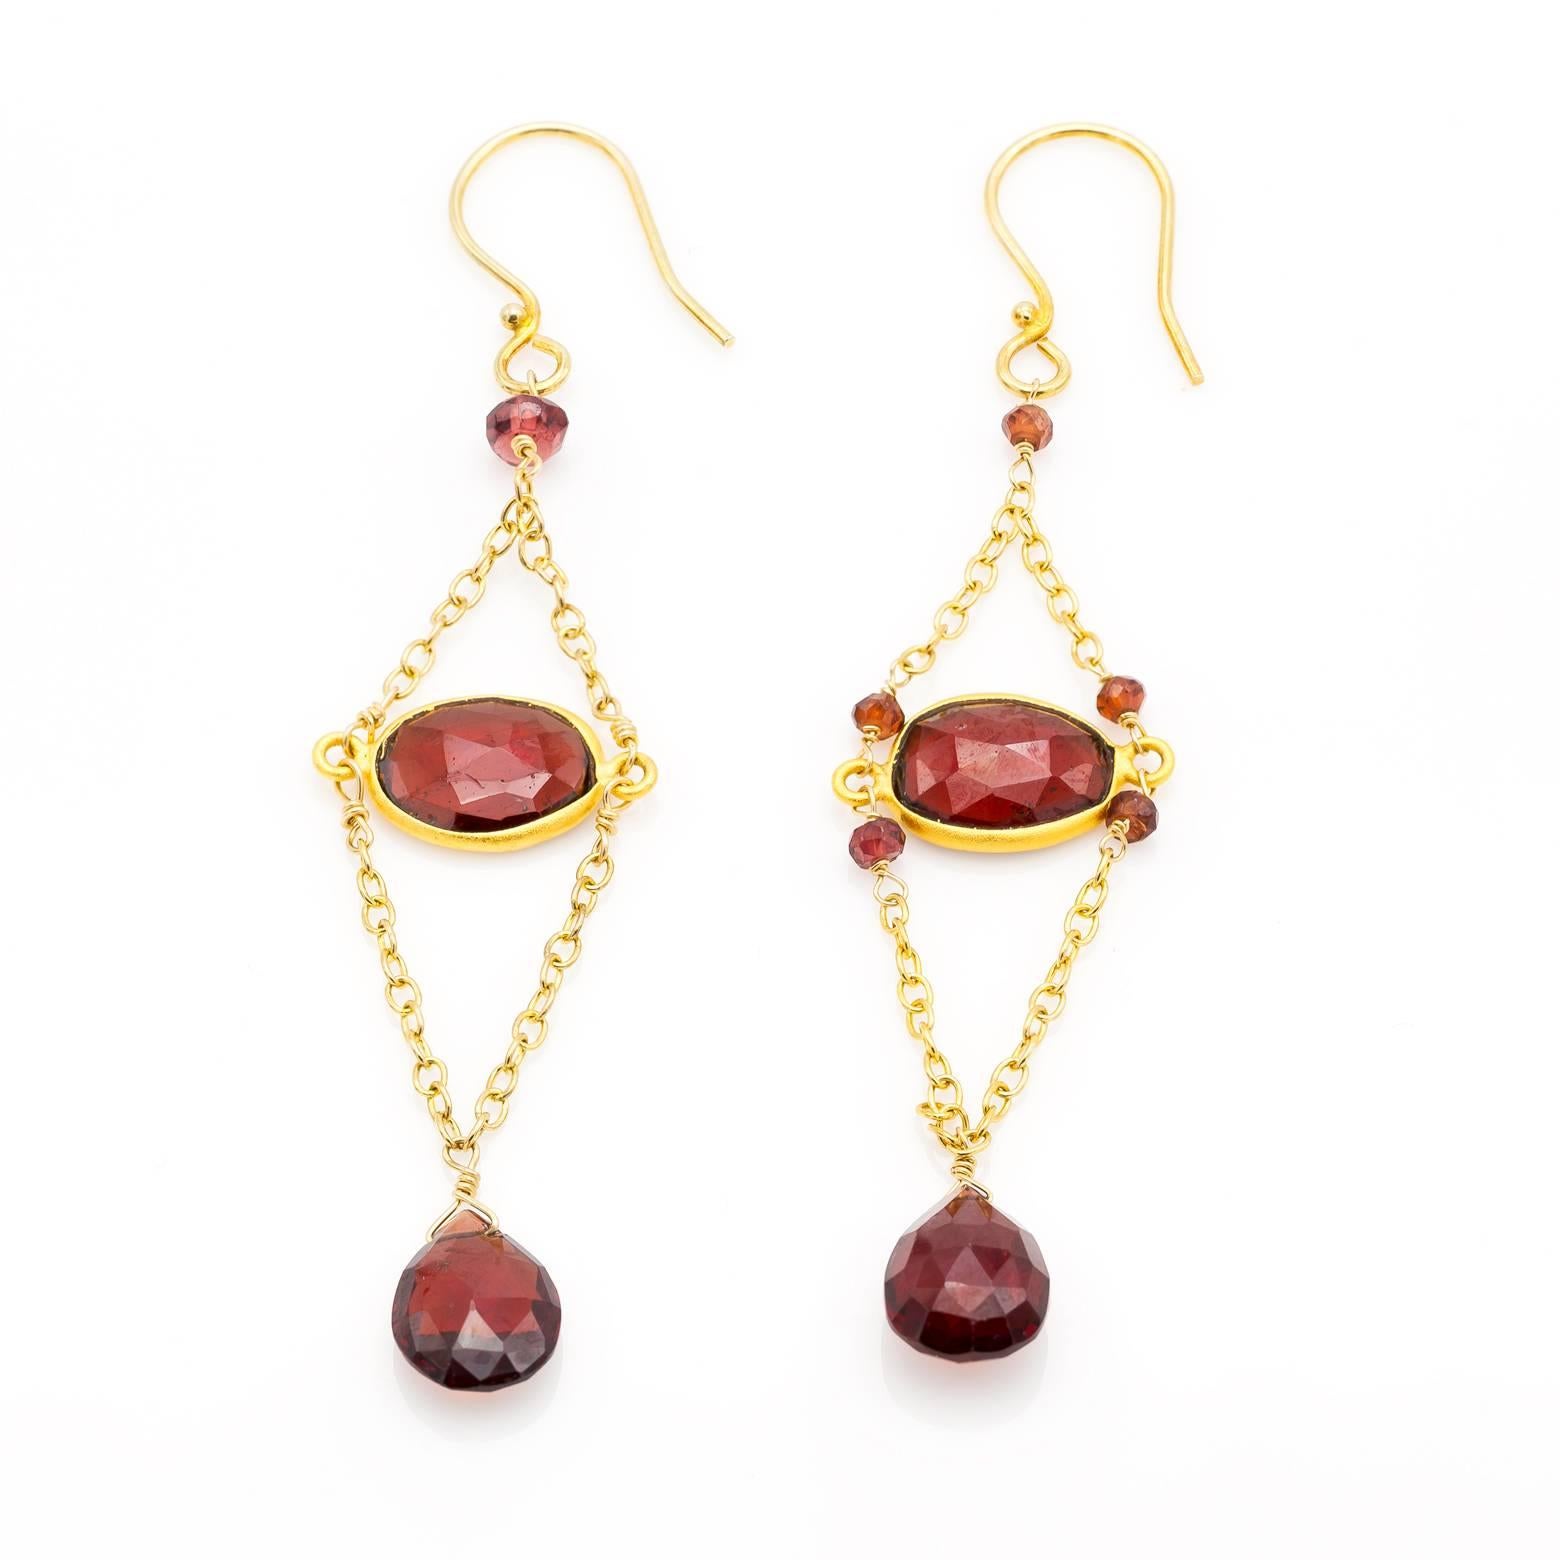 Modern Garnet and Gold Chain Earrings with Faceted Bead Briolettes